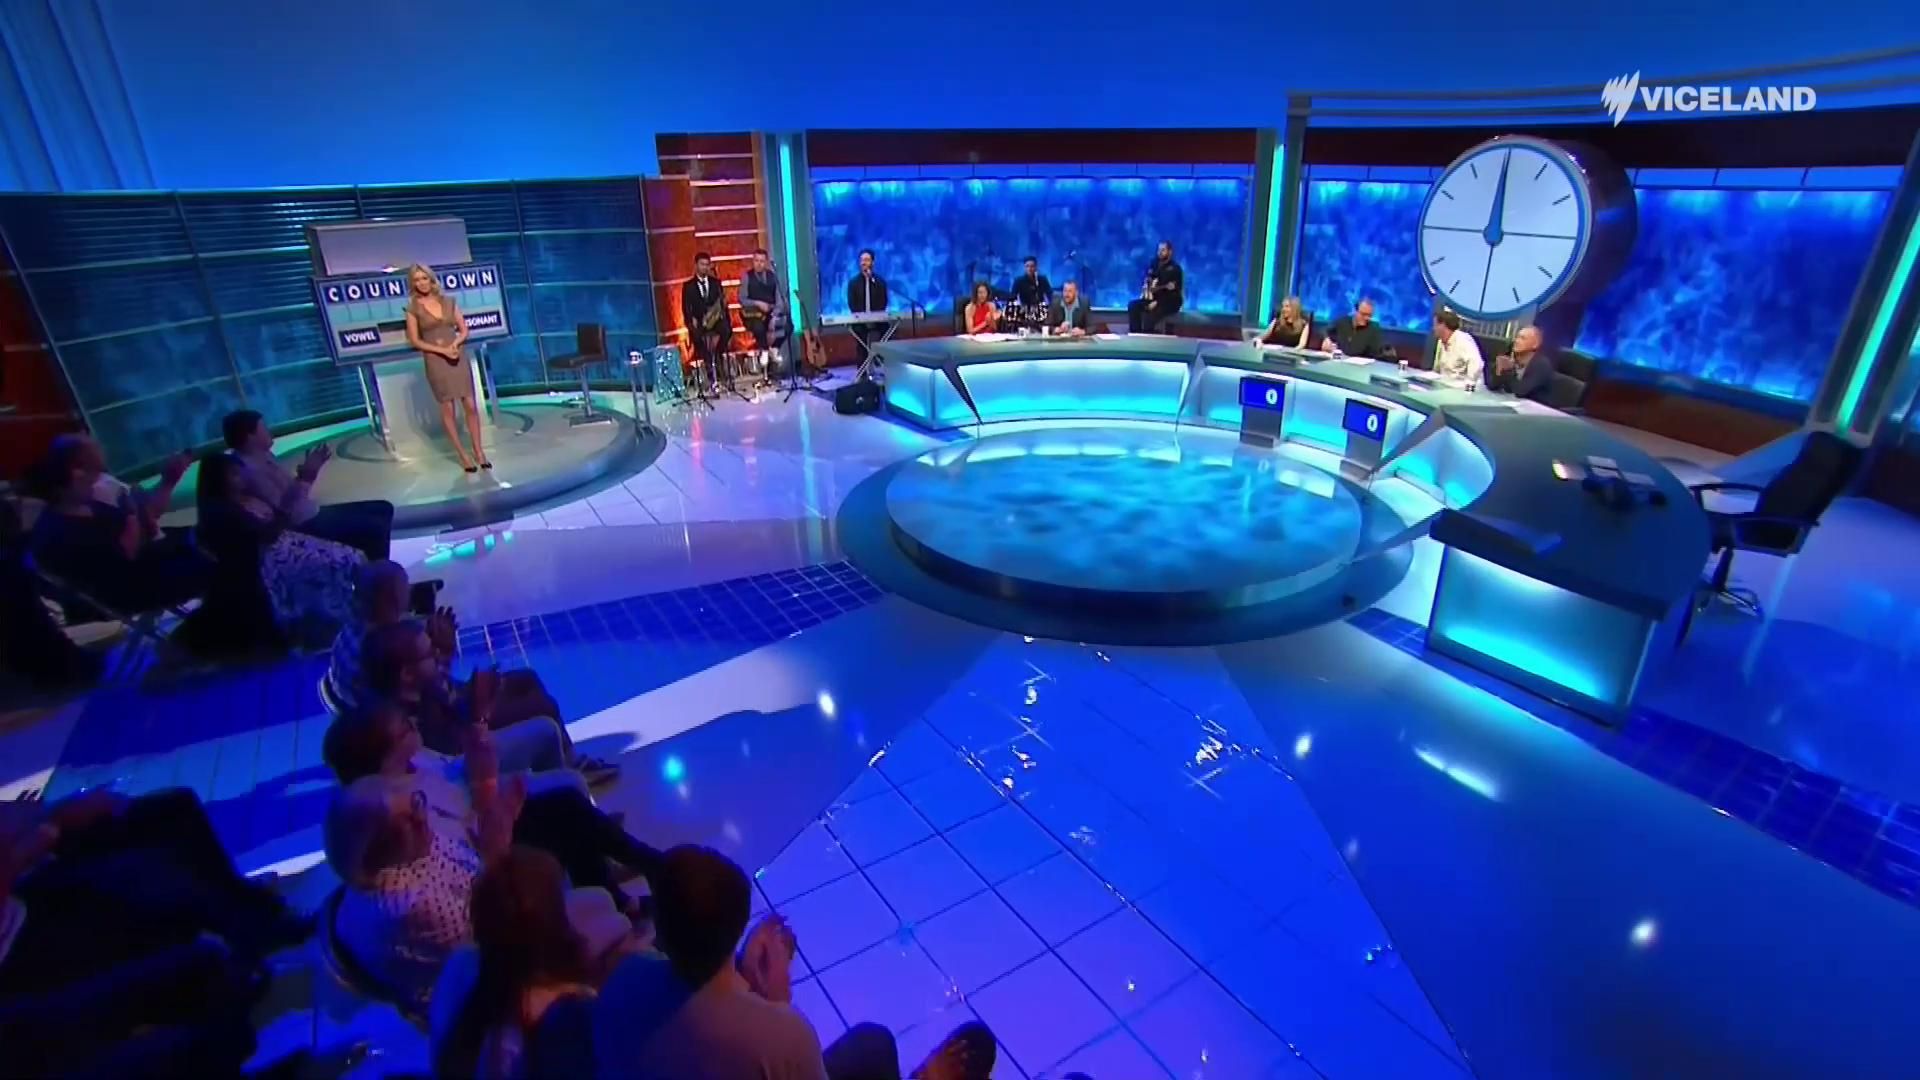 8 Out of 10 Cats Does Countdown background